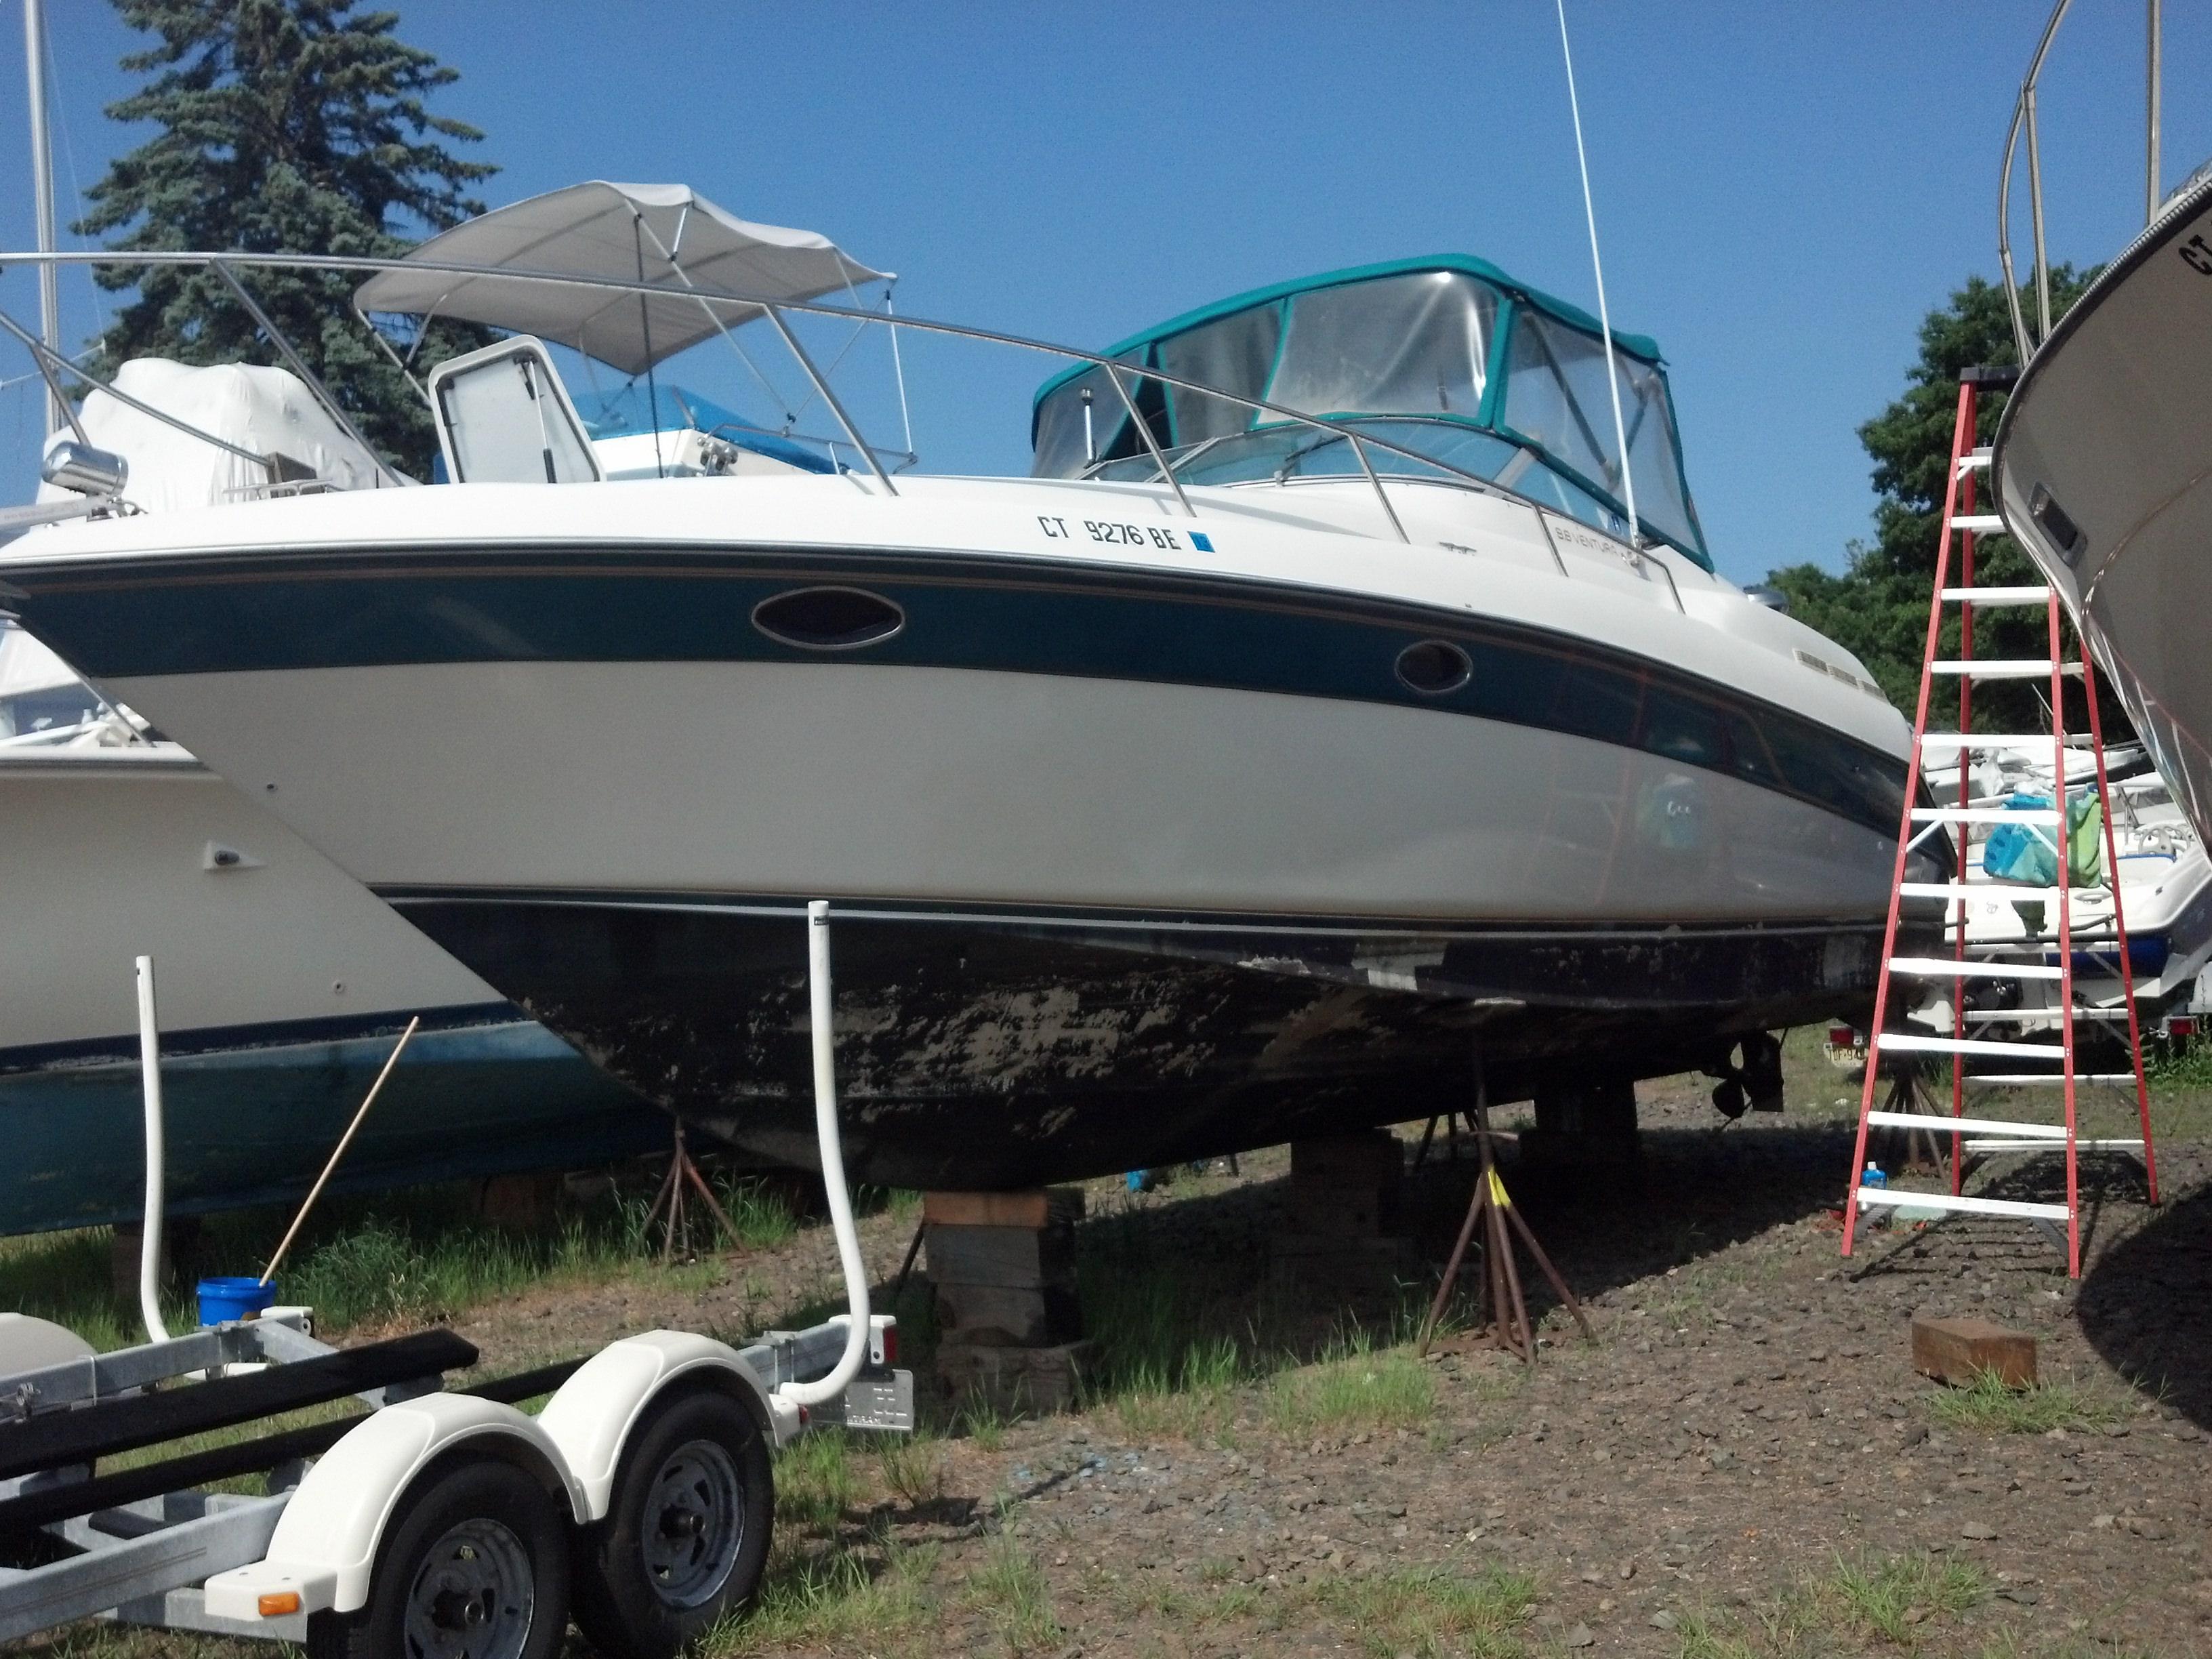 New and Used Boats for Sale in CT about 5,676 results for " S "